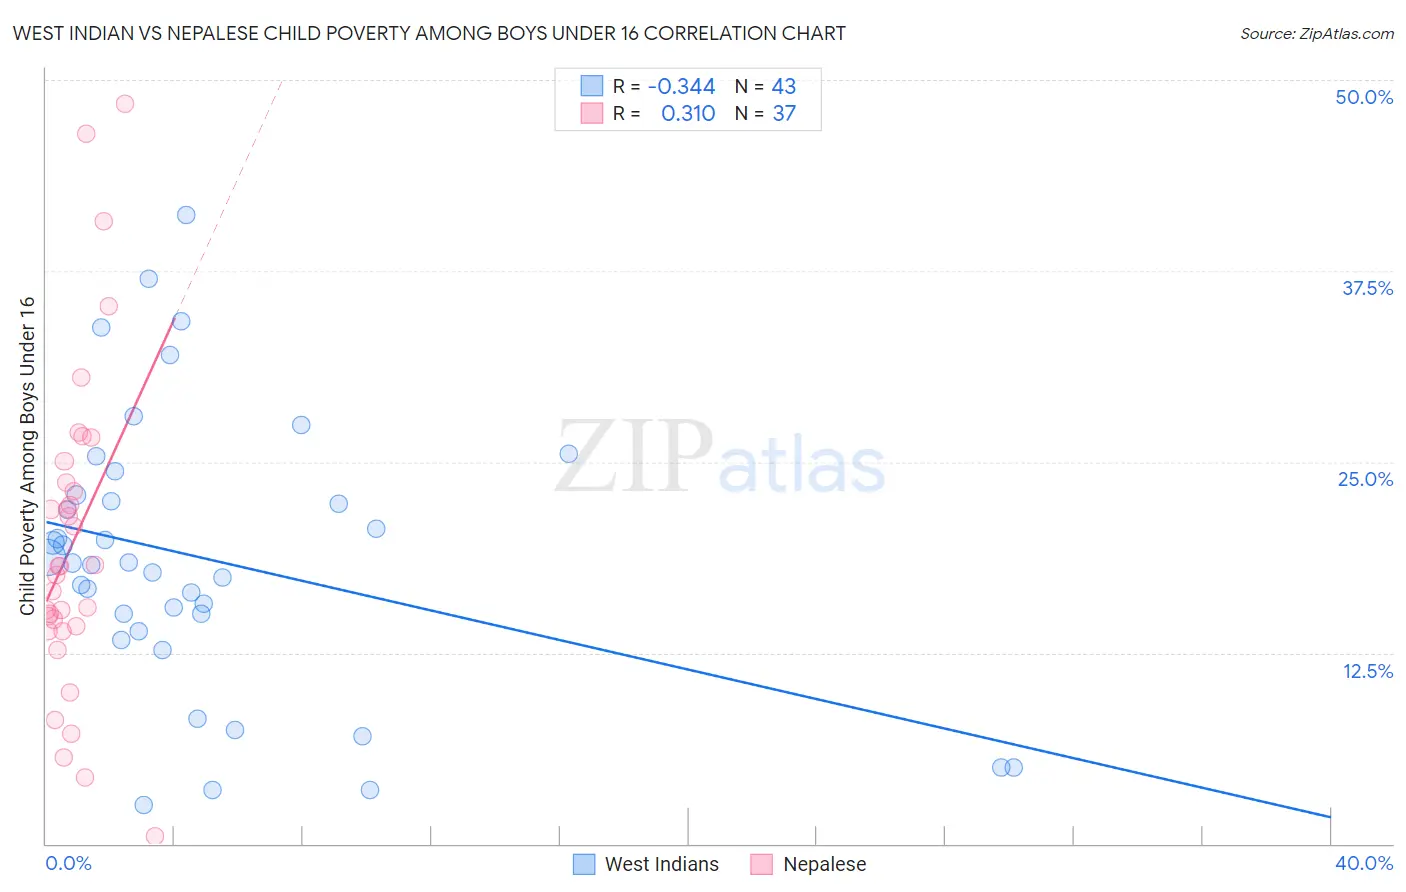 West Indian vs Nepalese Child Poverty Among Boys Under 16